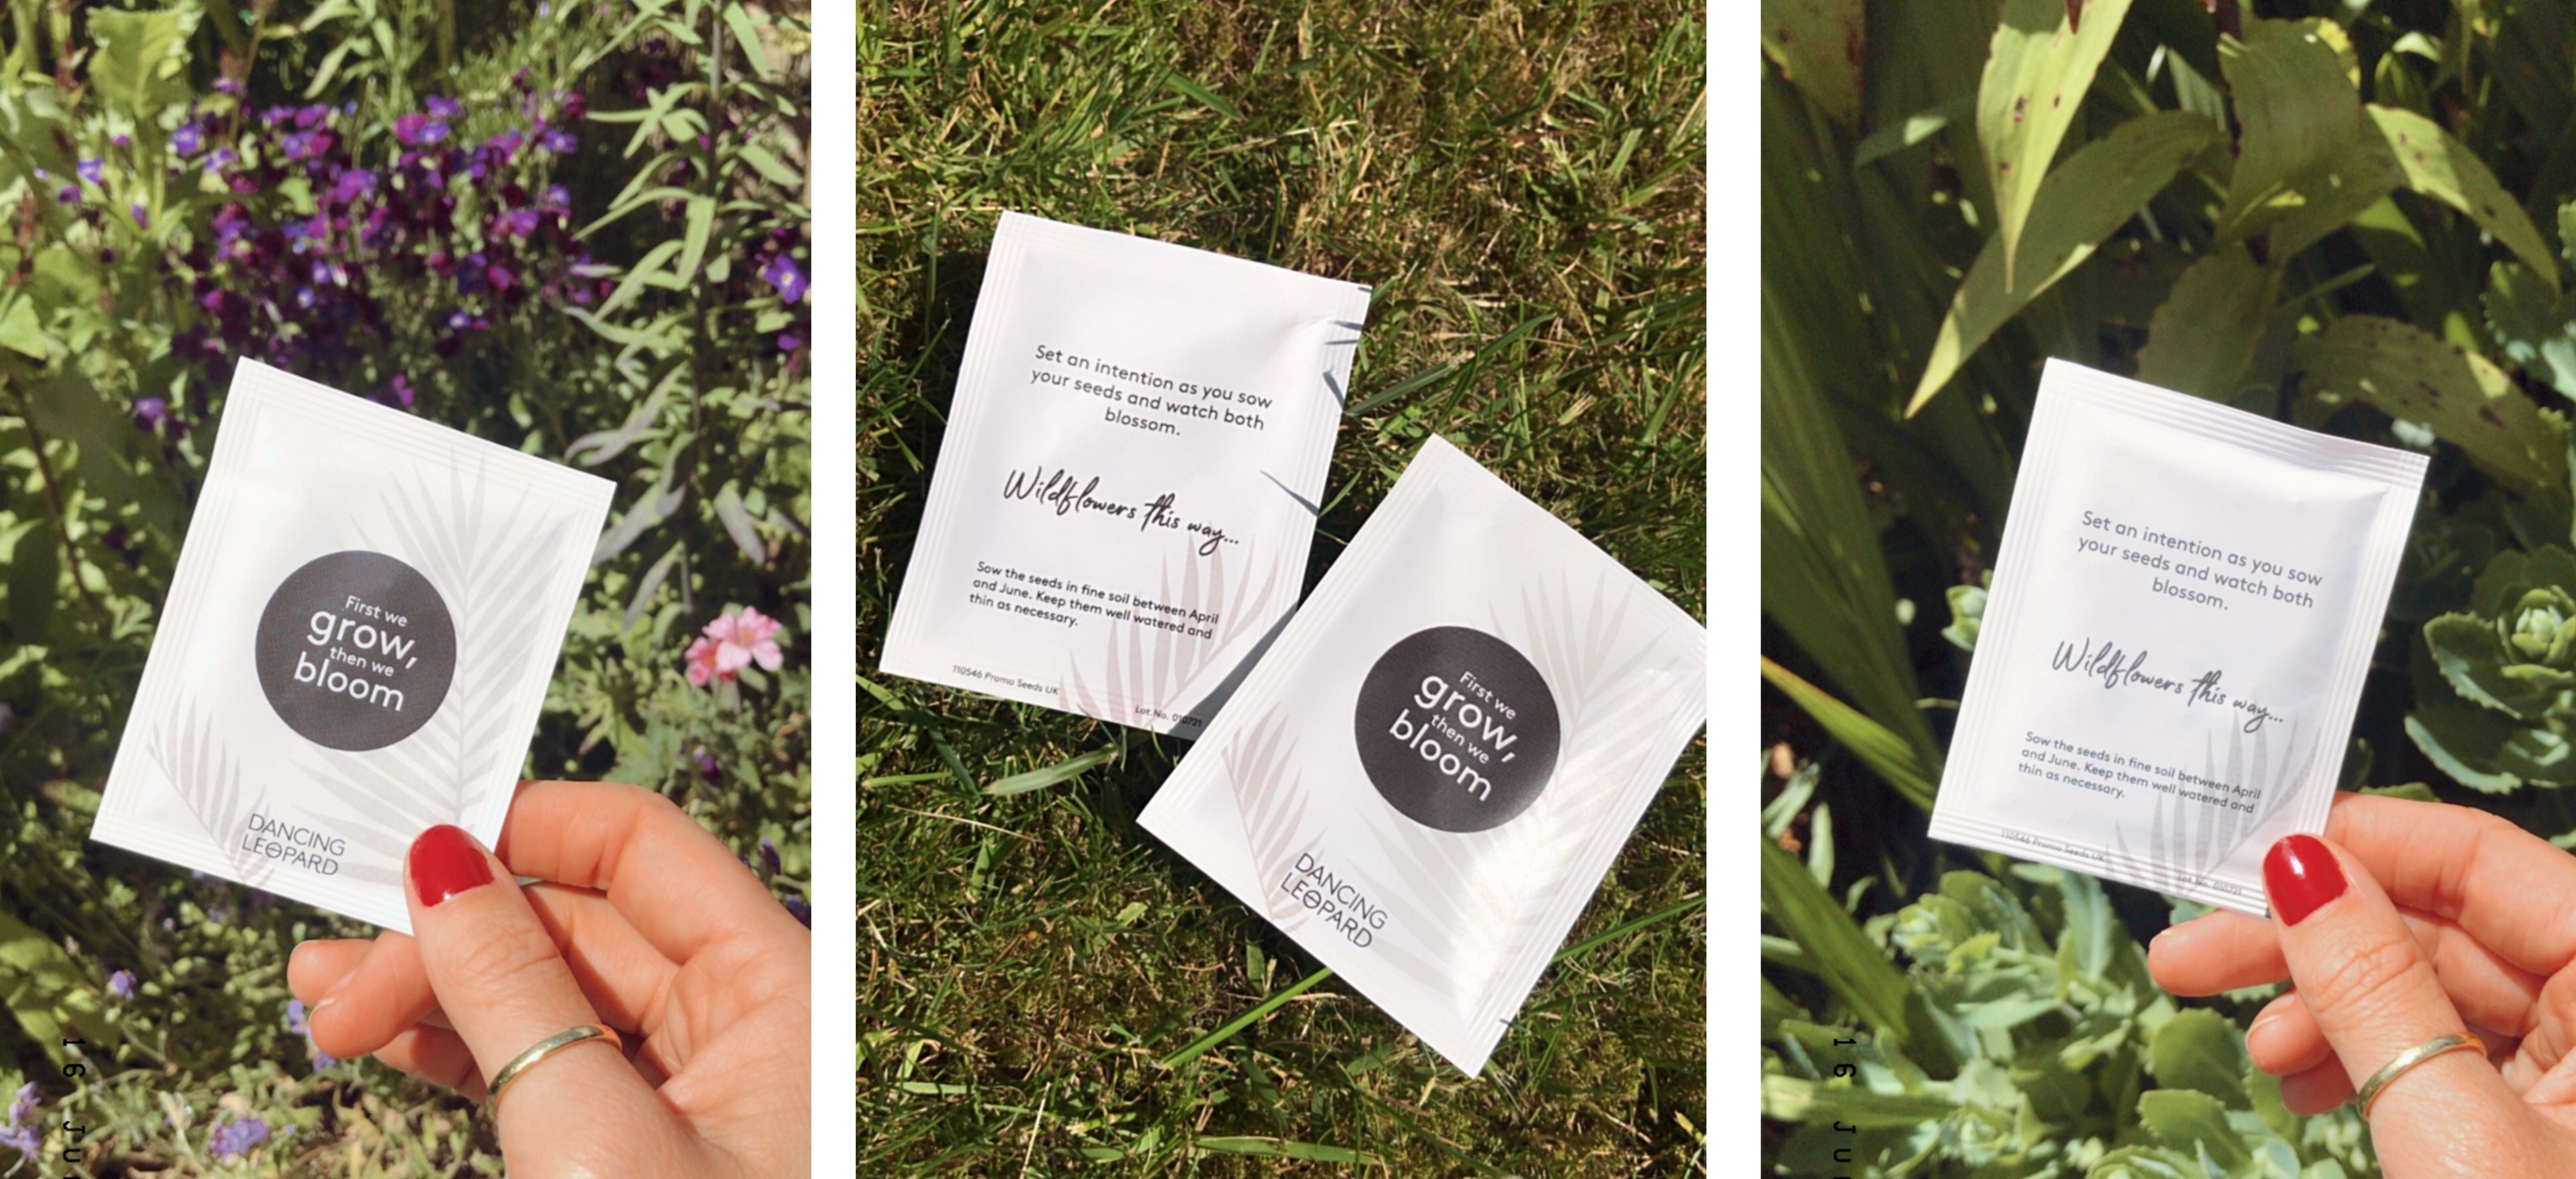 collage of images showing a hand holding wildflower seeds packet